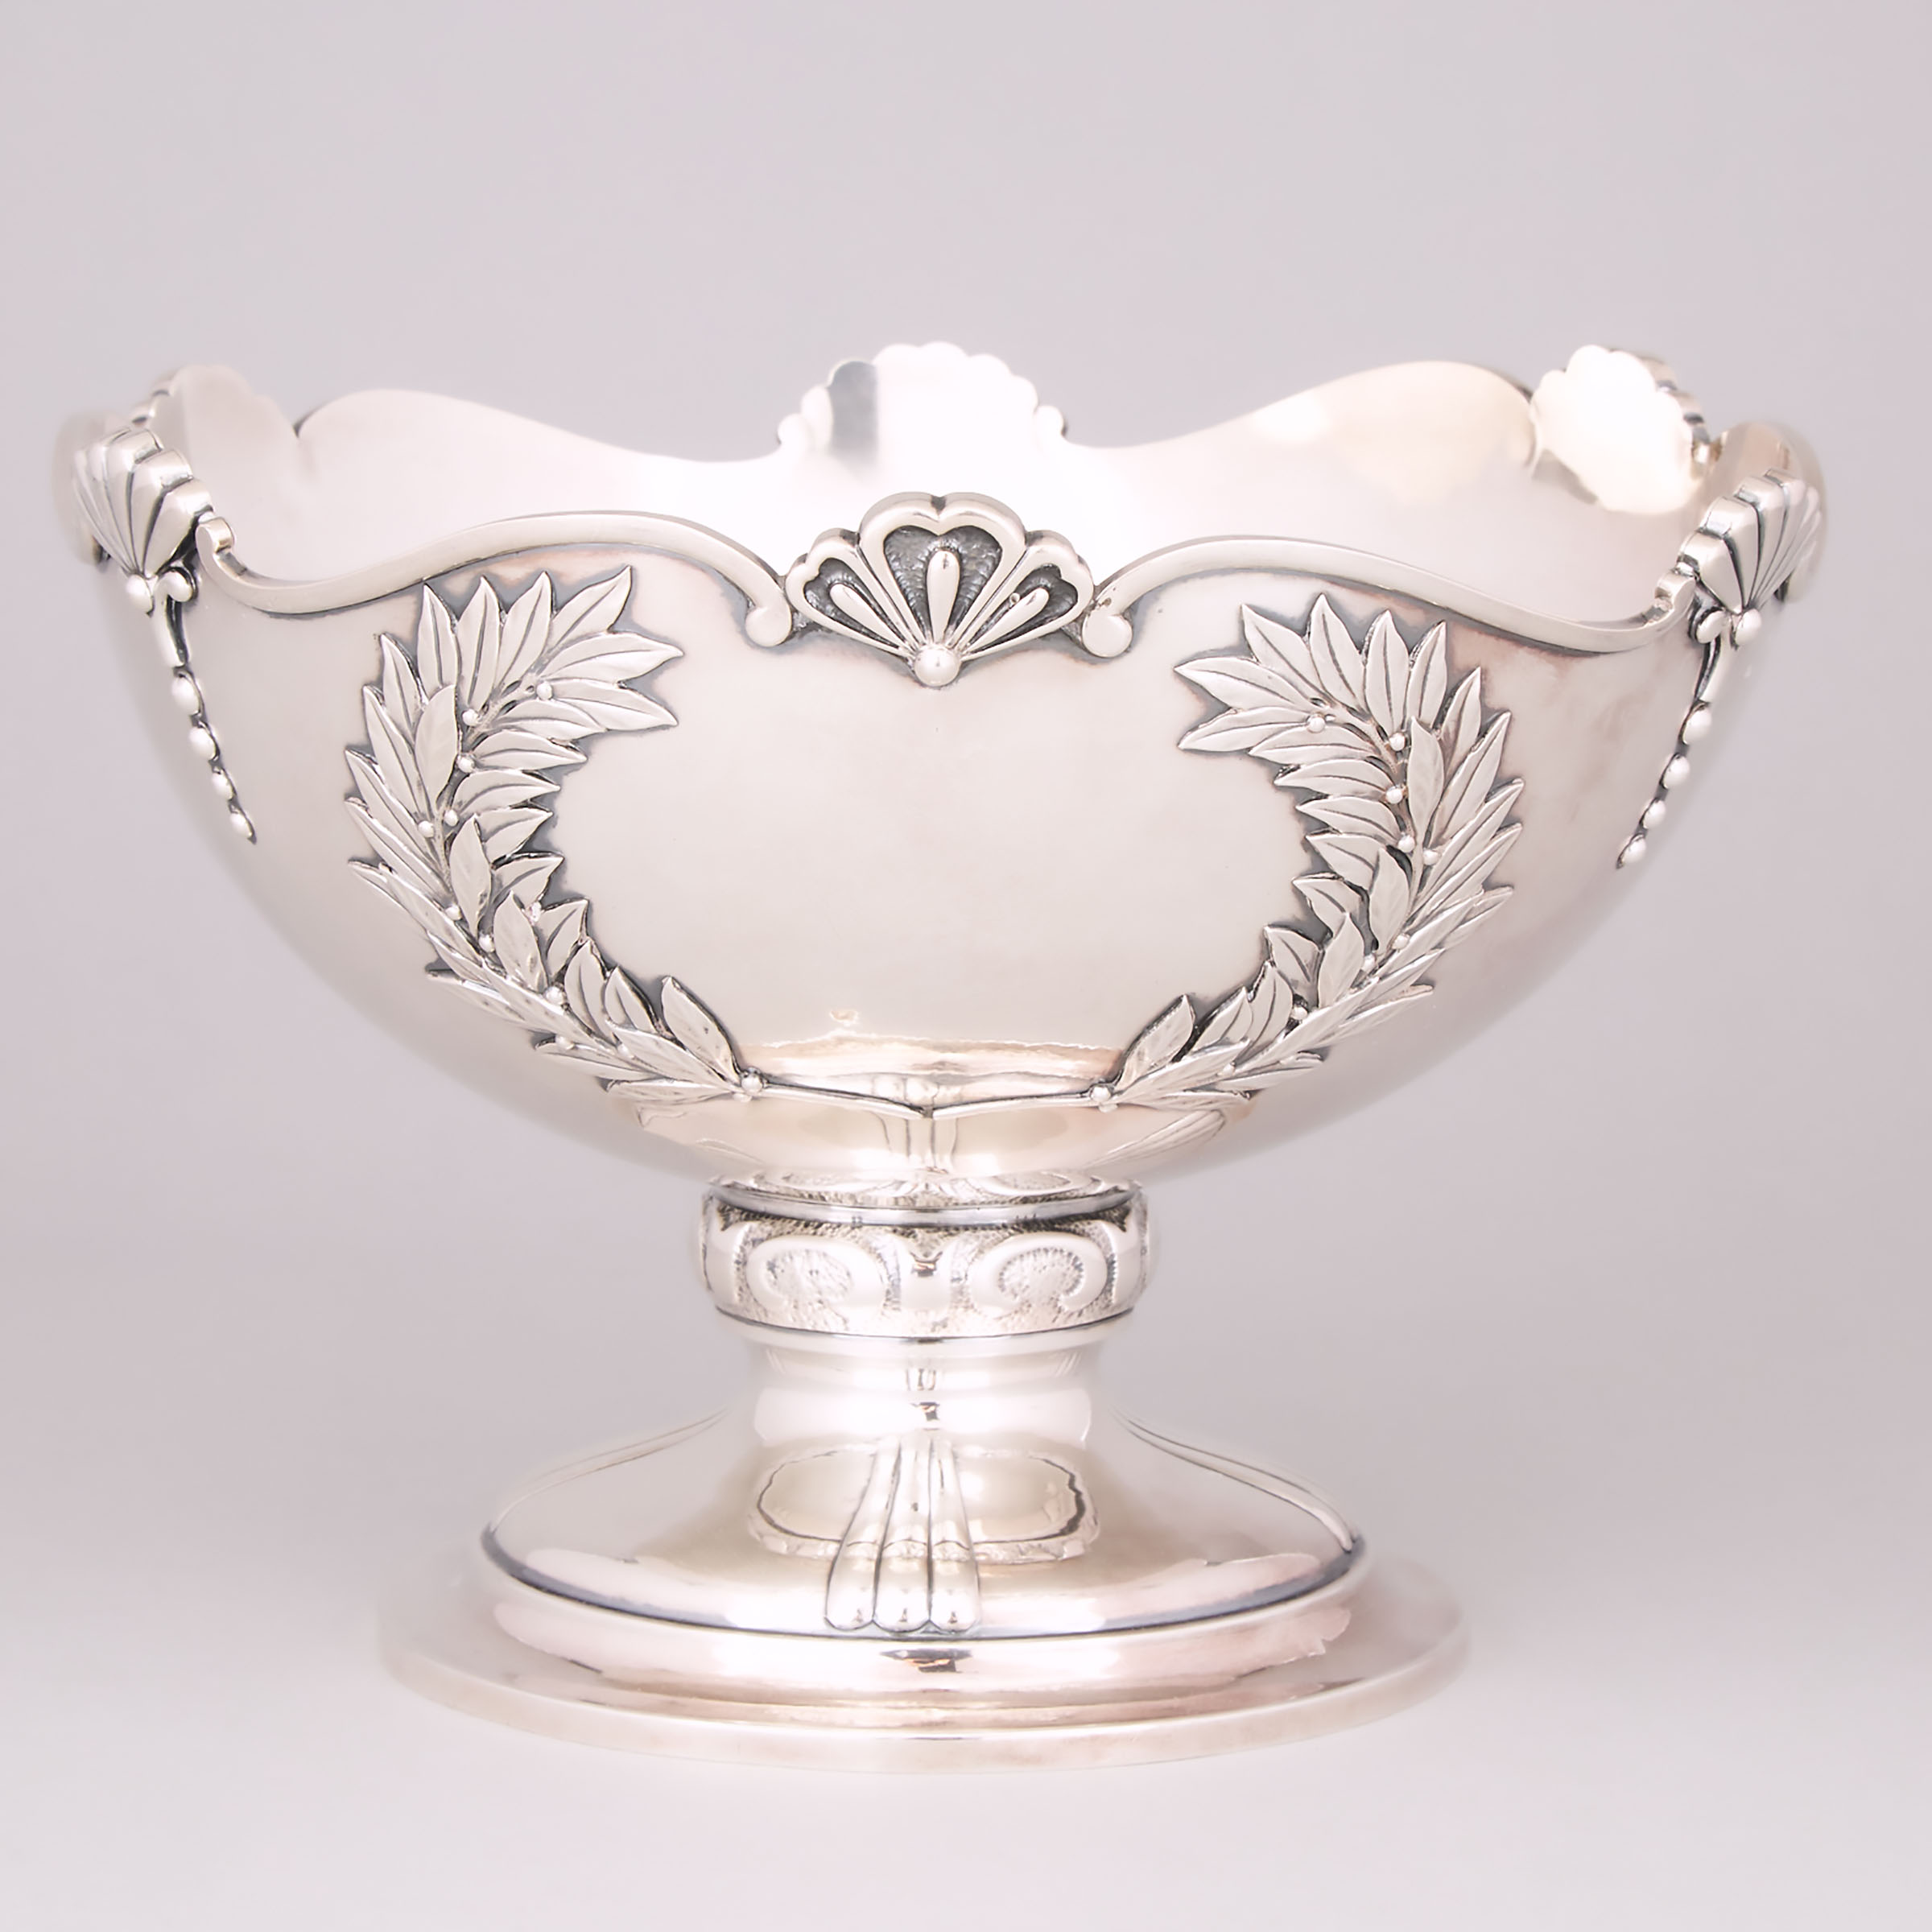 Japanese Silver Footed Bowl, 20th century